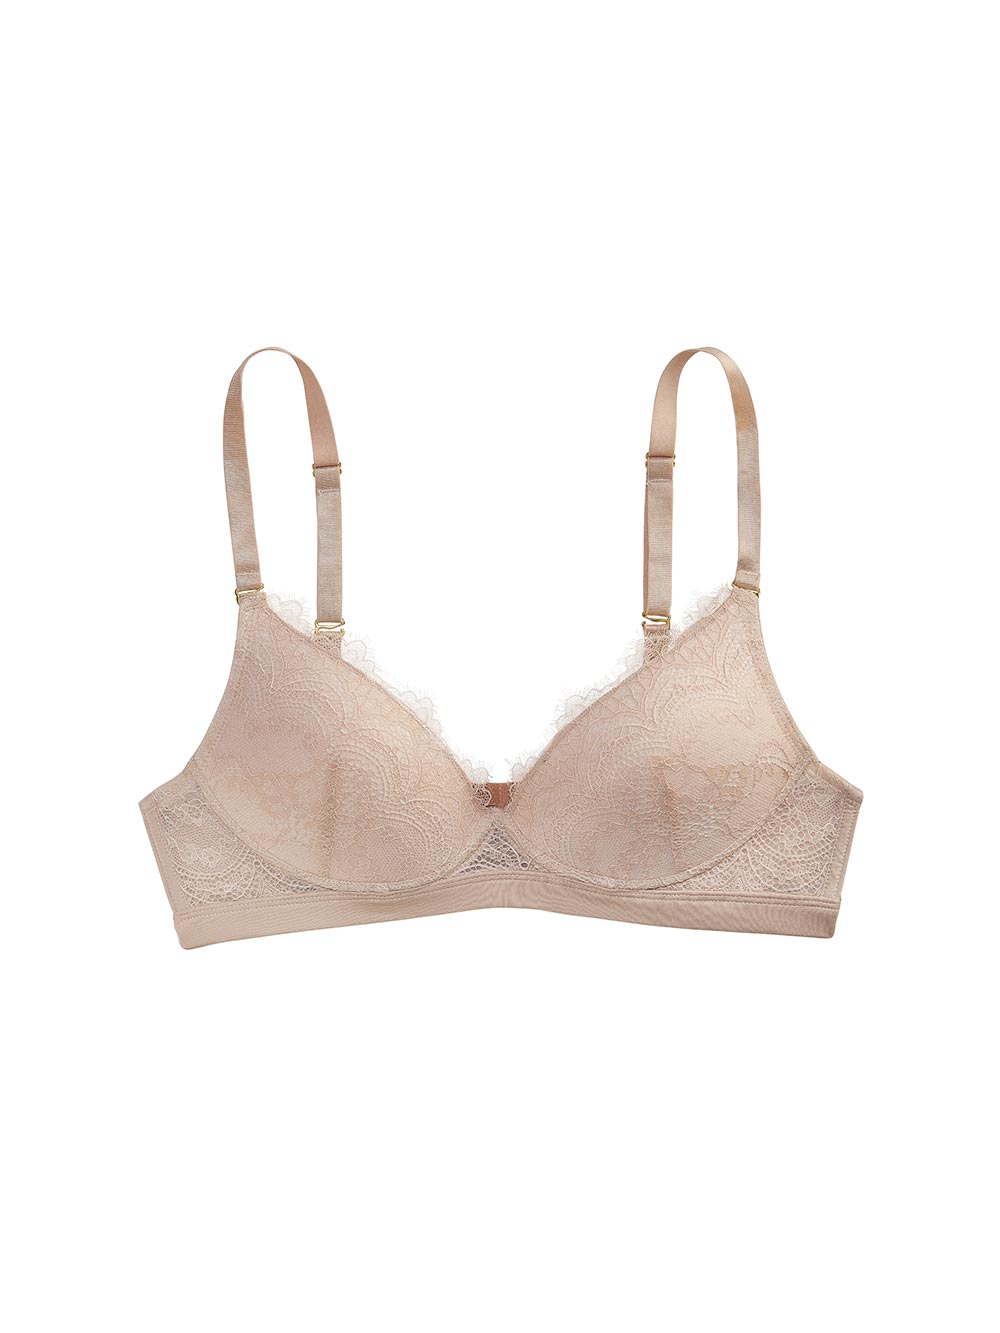 The Little Bra Company Lea Smooth Cup Bra for Petite Women | Wireless |  Lightly Contoured Push Up Cups | Double Back Clasp